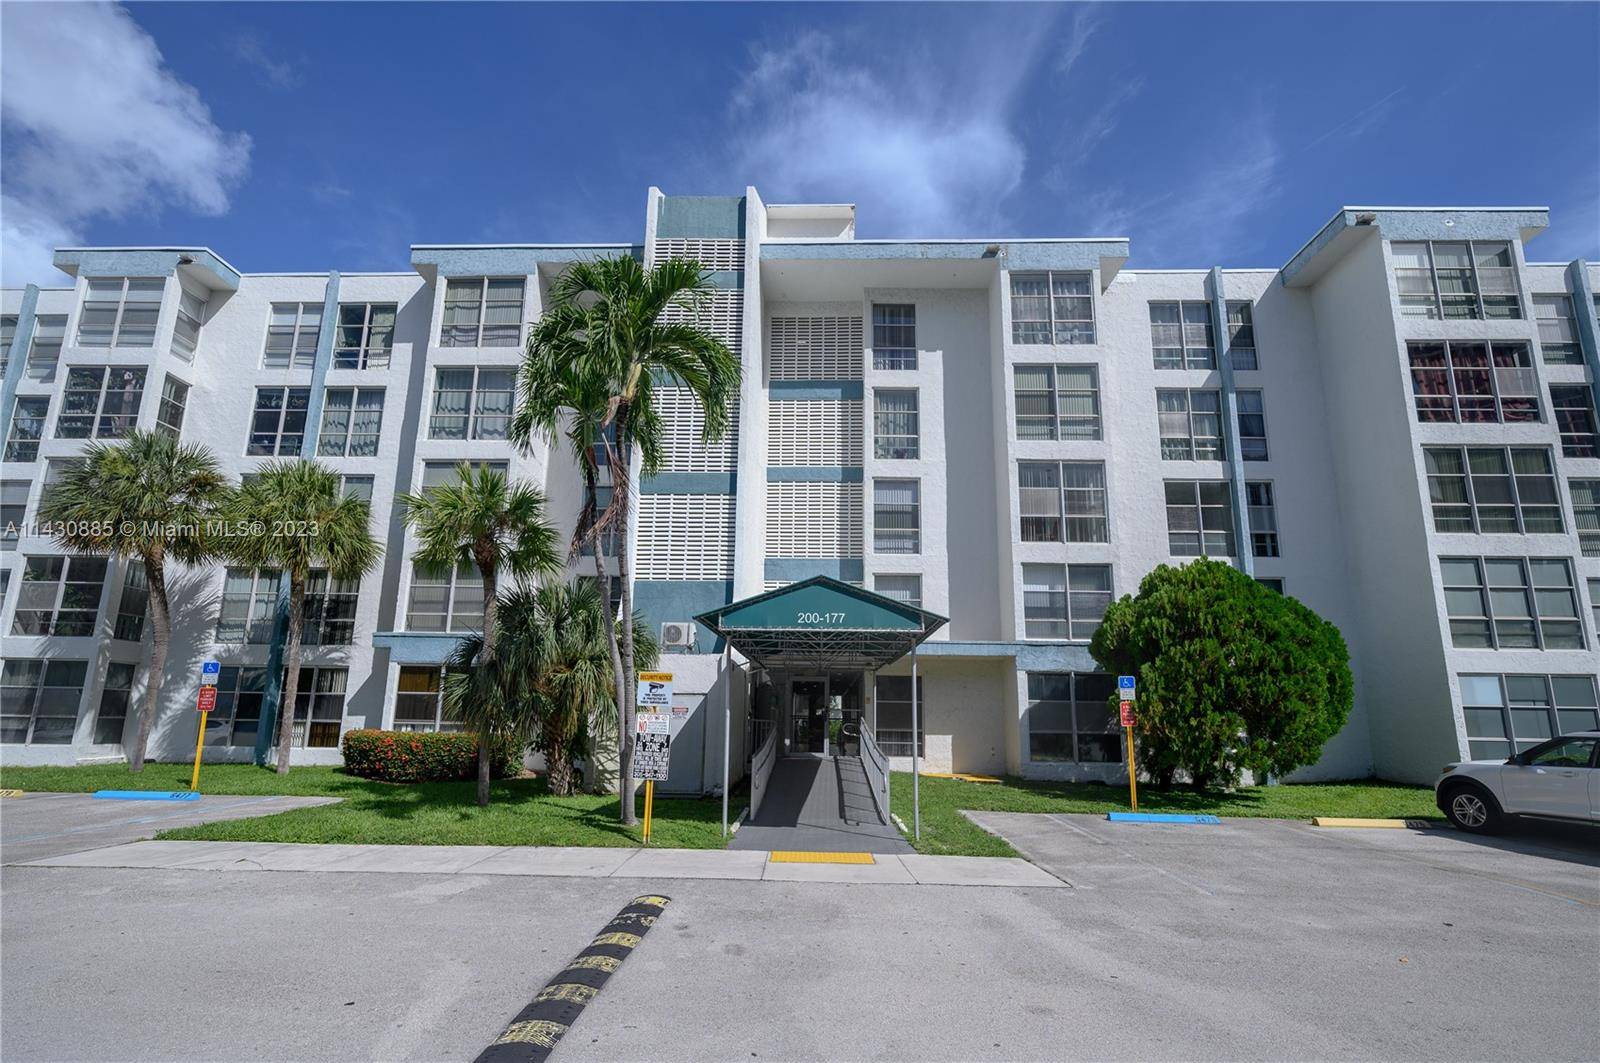 Surround yourself, with Miami Elites right In the heart of Sunny Isles, Must see this updated 1 Bedroom, 1 Bathroom plus Den.